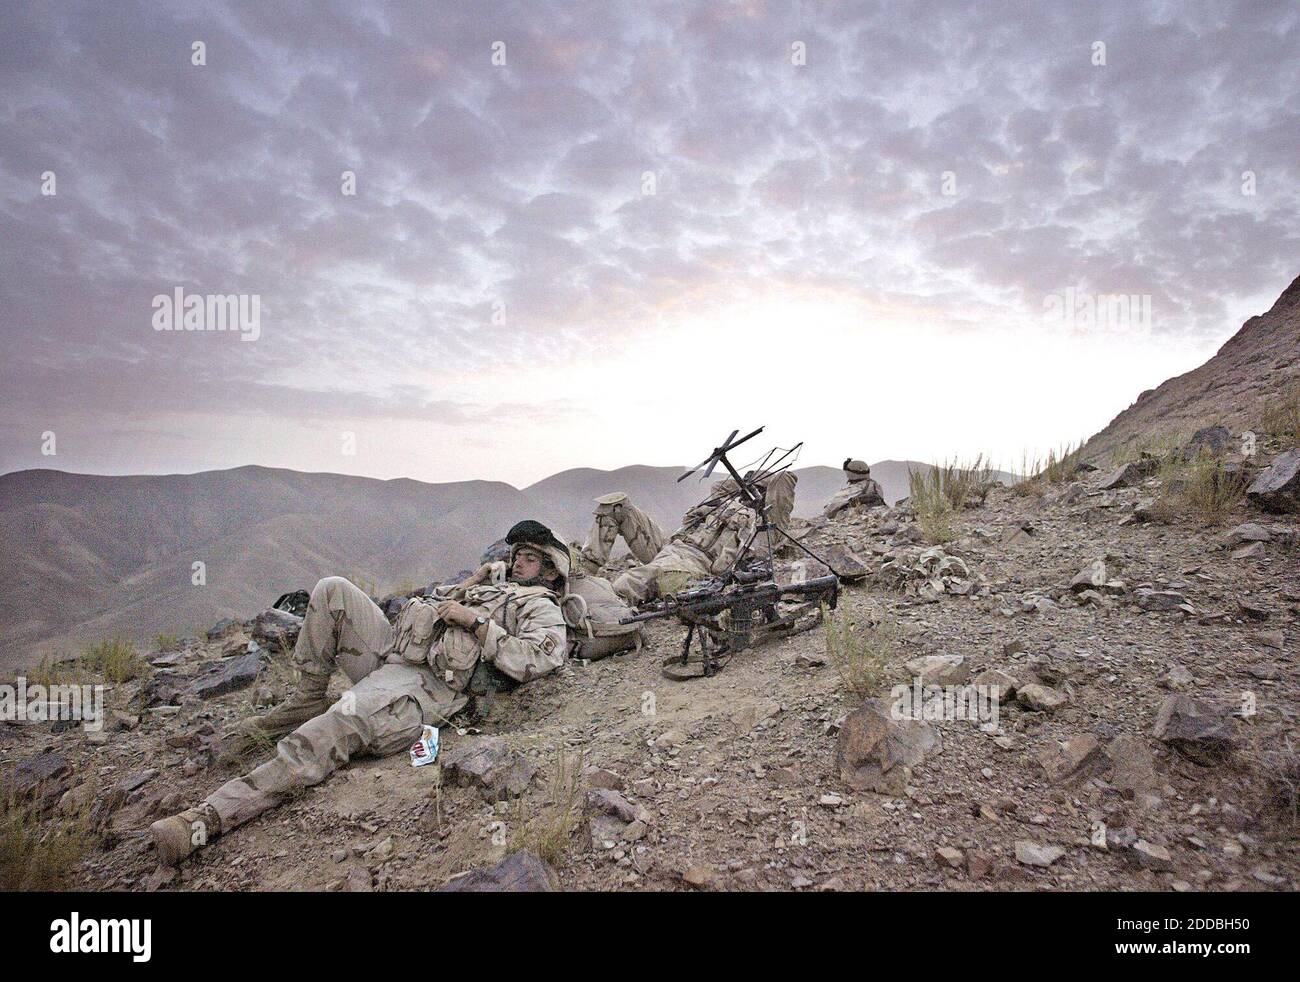 NO FILM, NO VIDEO, NO TV, NO DOCUMENTARY - Soldiers from Battle Company, 2nd Batt. Airborne, 503rd Infantry, 173rd Airborne Brigade monitor the radio traffic as the sun goes down high in the mountains while participating in Operation Como in the Deh Chopan District of Zabul Province, Afghanistan, on August 10, 2005. Photo by Tom Pennington/Fort Worth Star-Telegram/KRT/ABACAPRESS.COM. Stock Photo